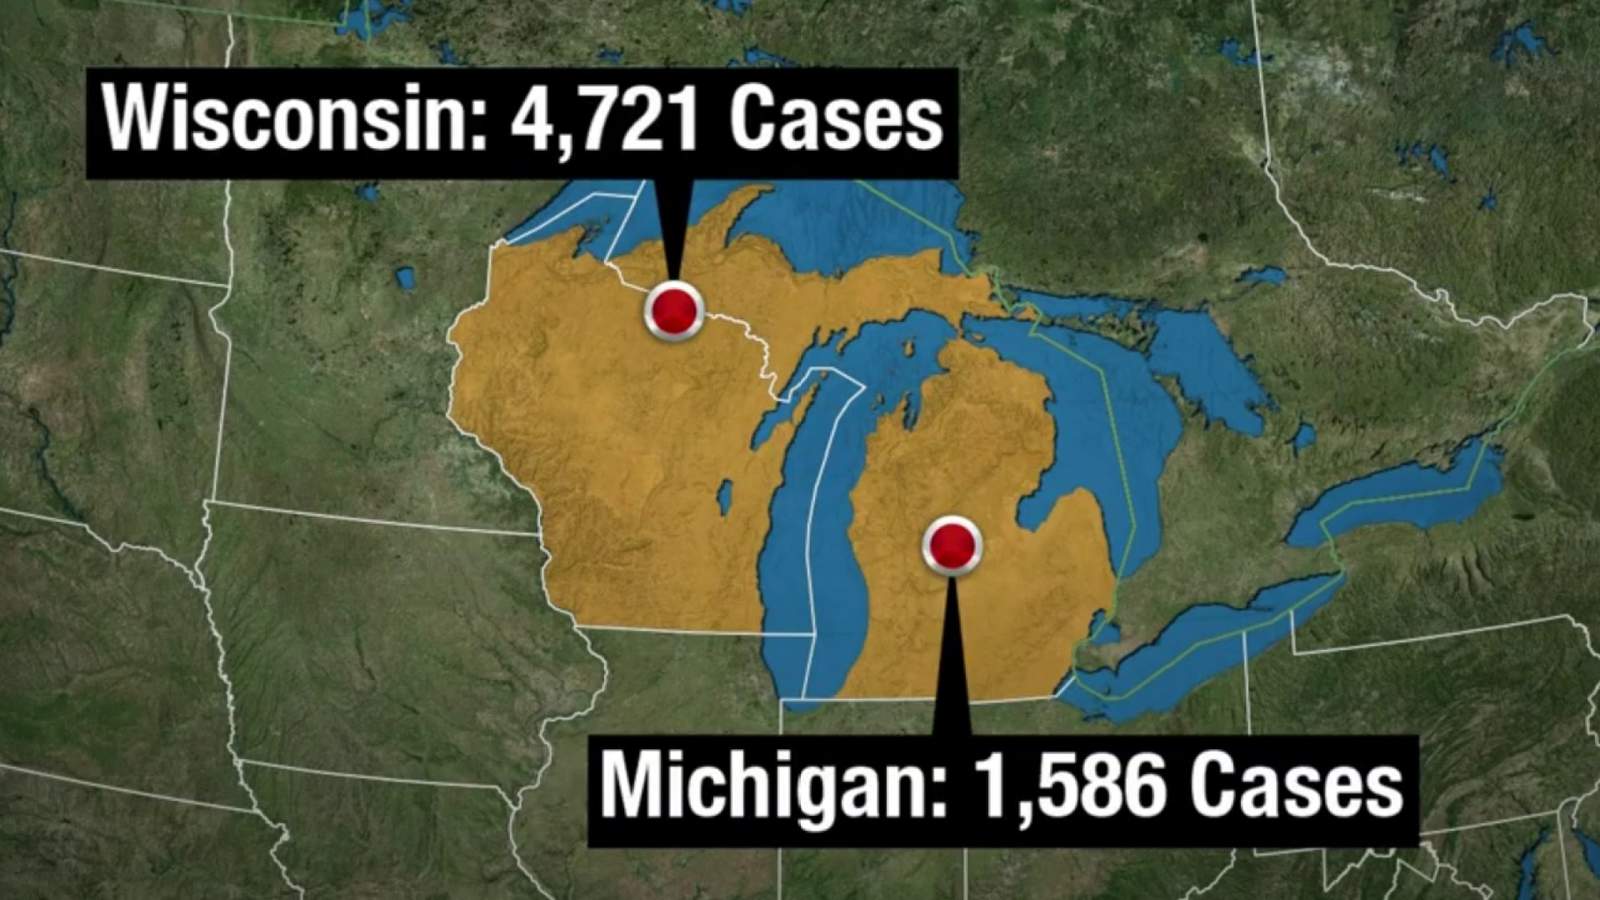 Experts look to Wisconsin’s COVID-19 numbers as a warning